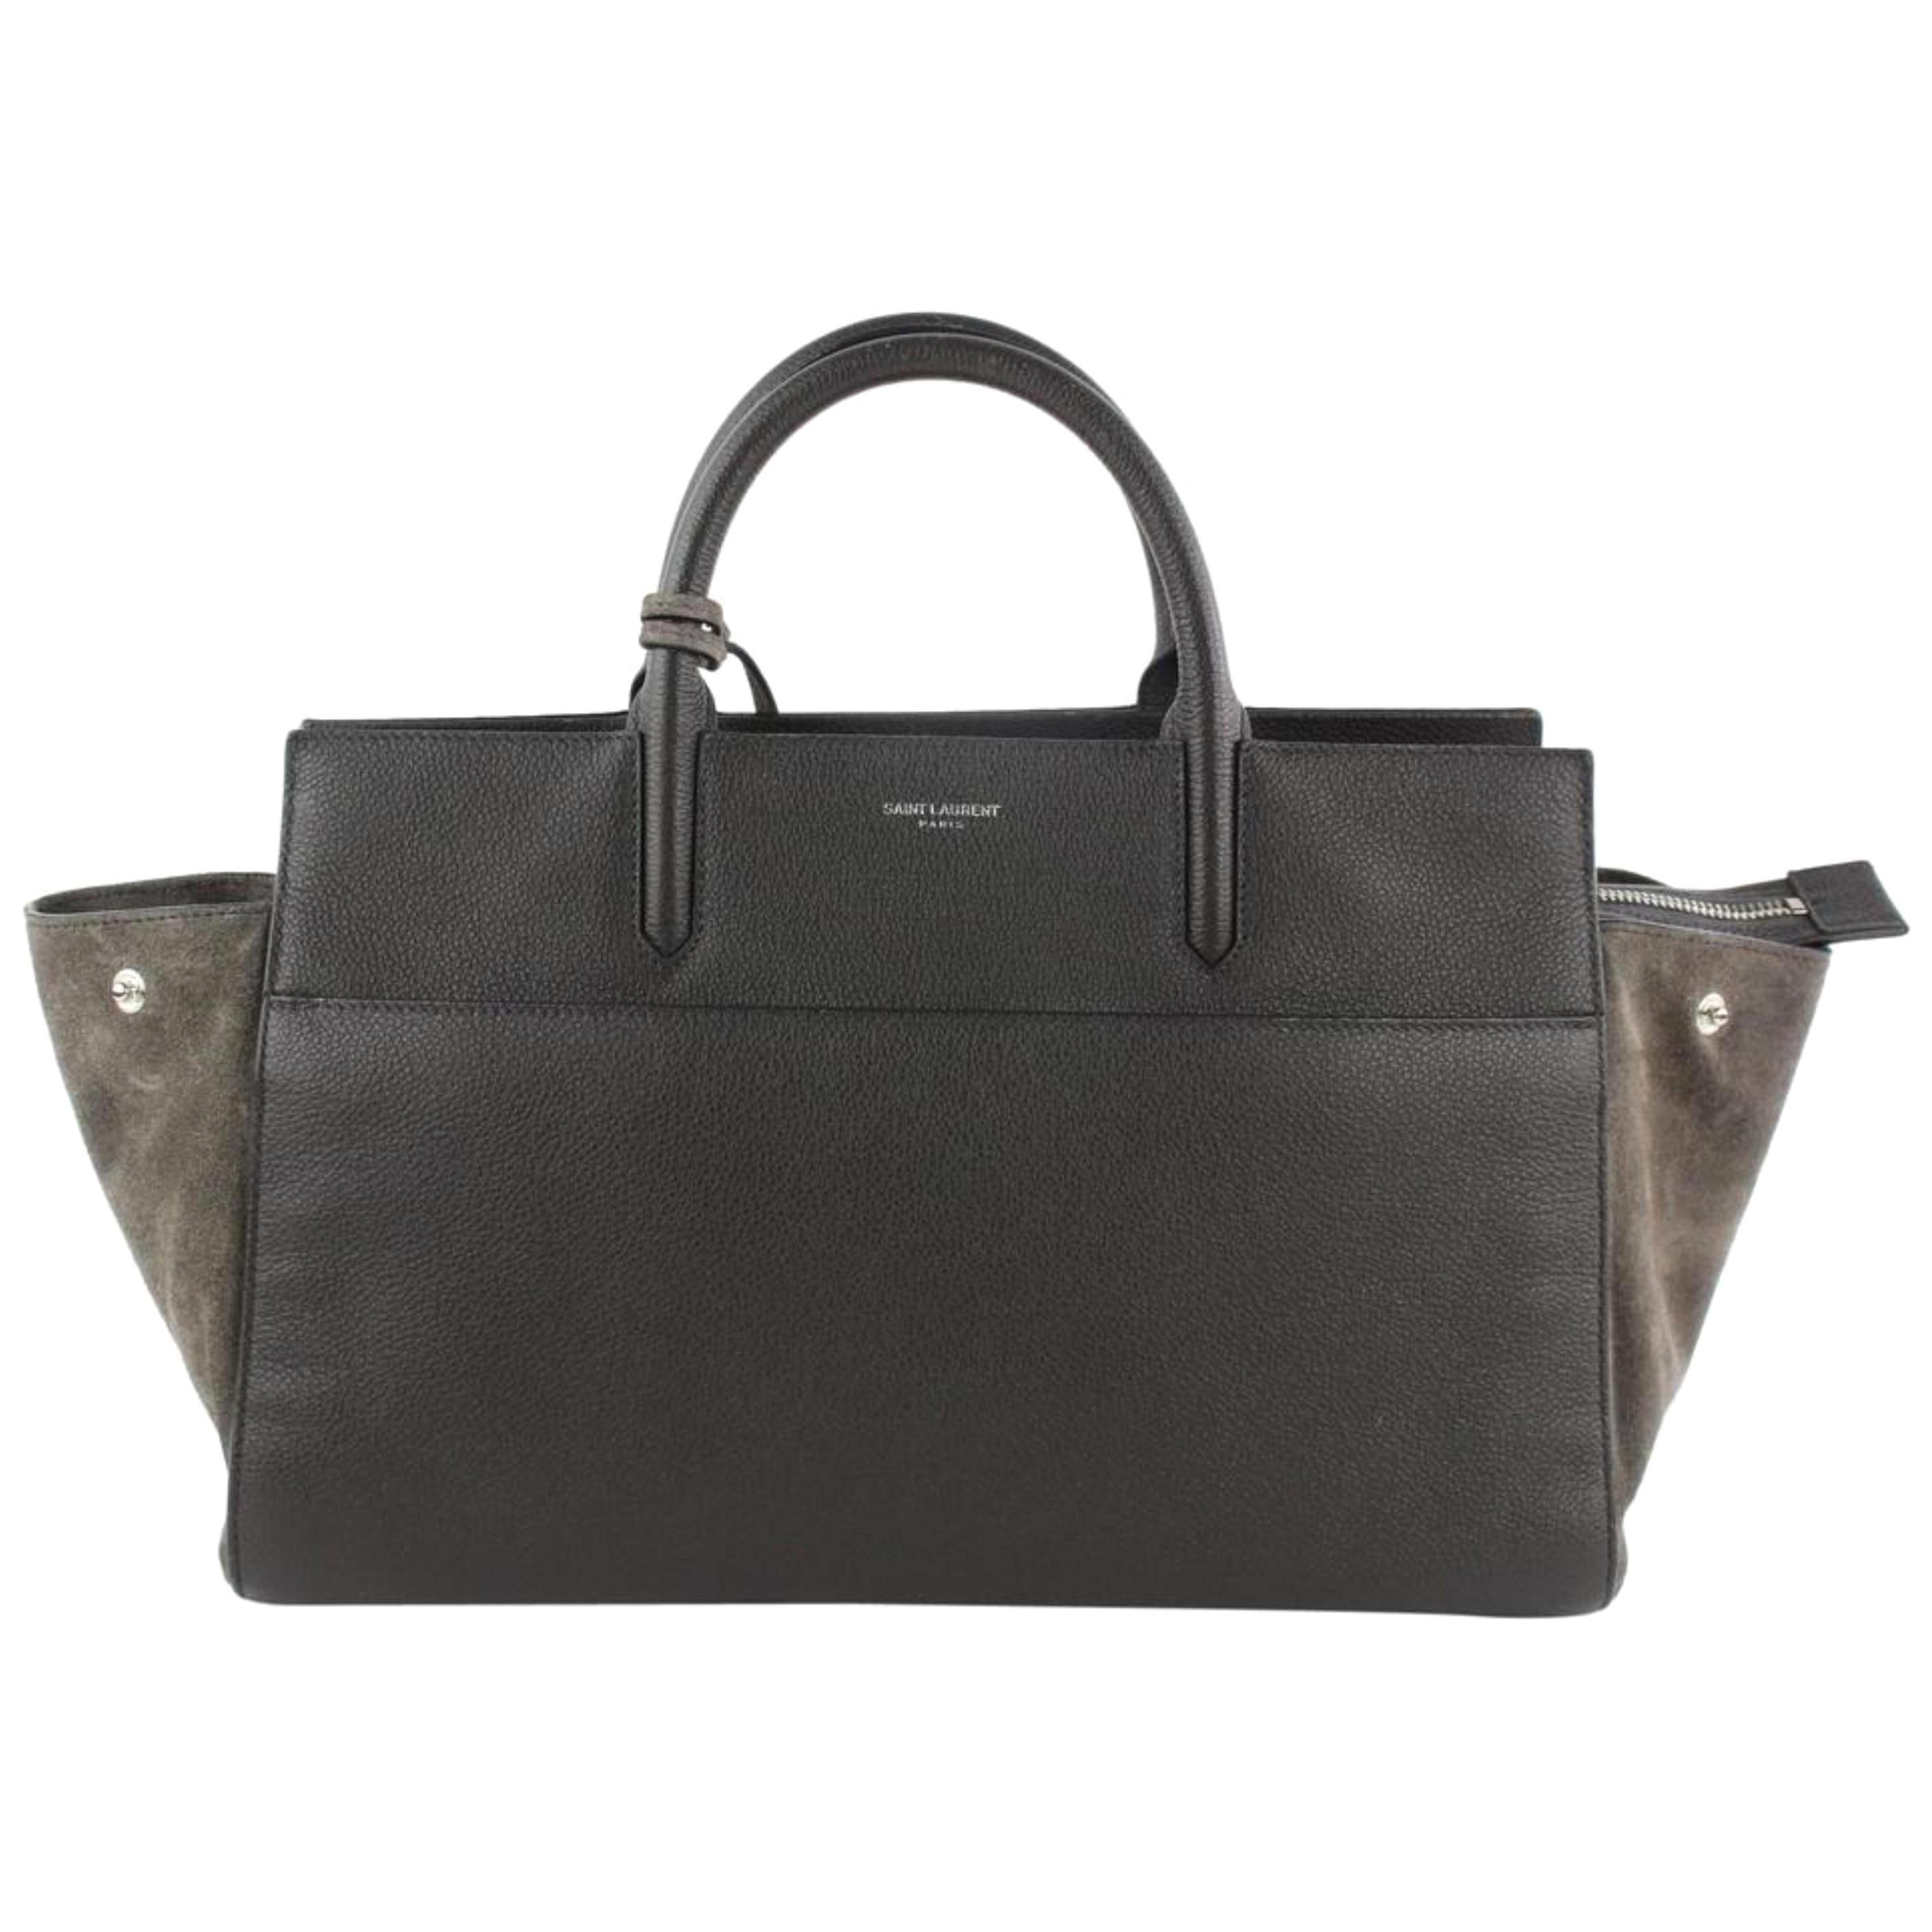 Saint Laurent Cabas Rive Gauche Anthracite Small 2way 16mz1019 Grey Leather Tote For Sale